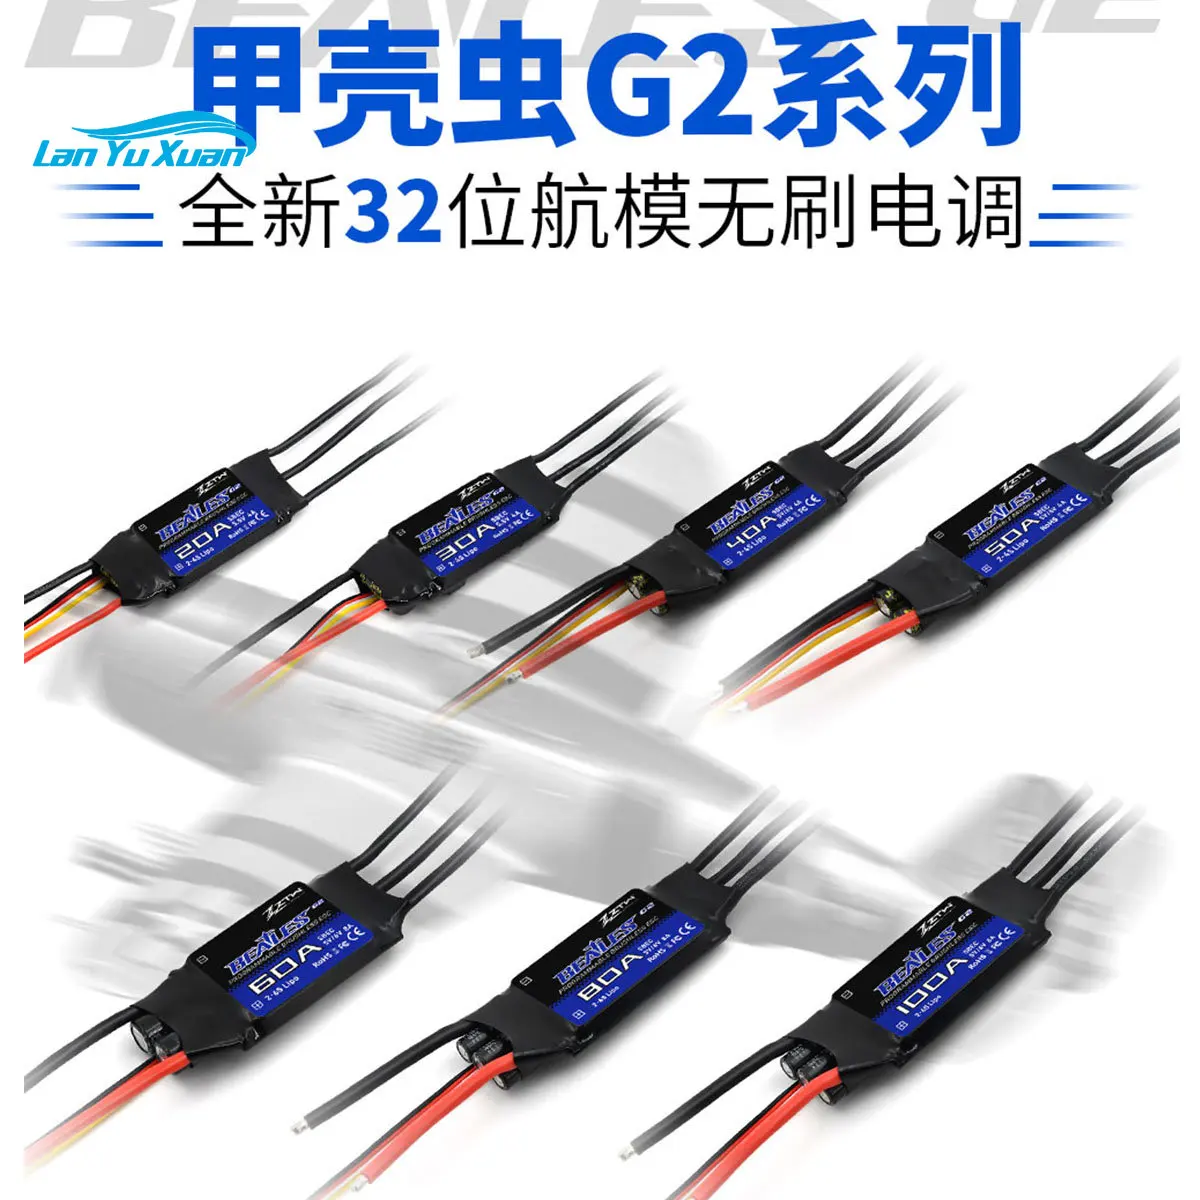 Zhongtewei Beetle G2 upgraded brushless electric tuning 20A30A40A50A60A80A100A aircraft model fixed wing